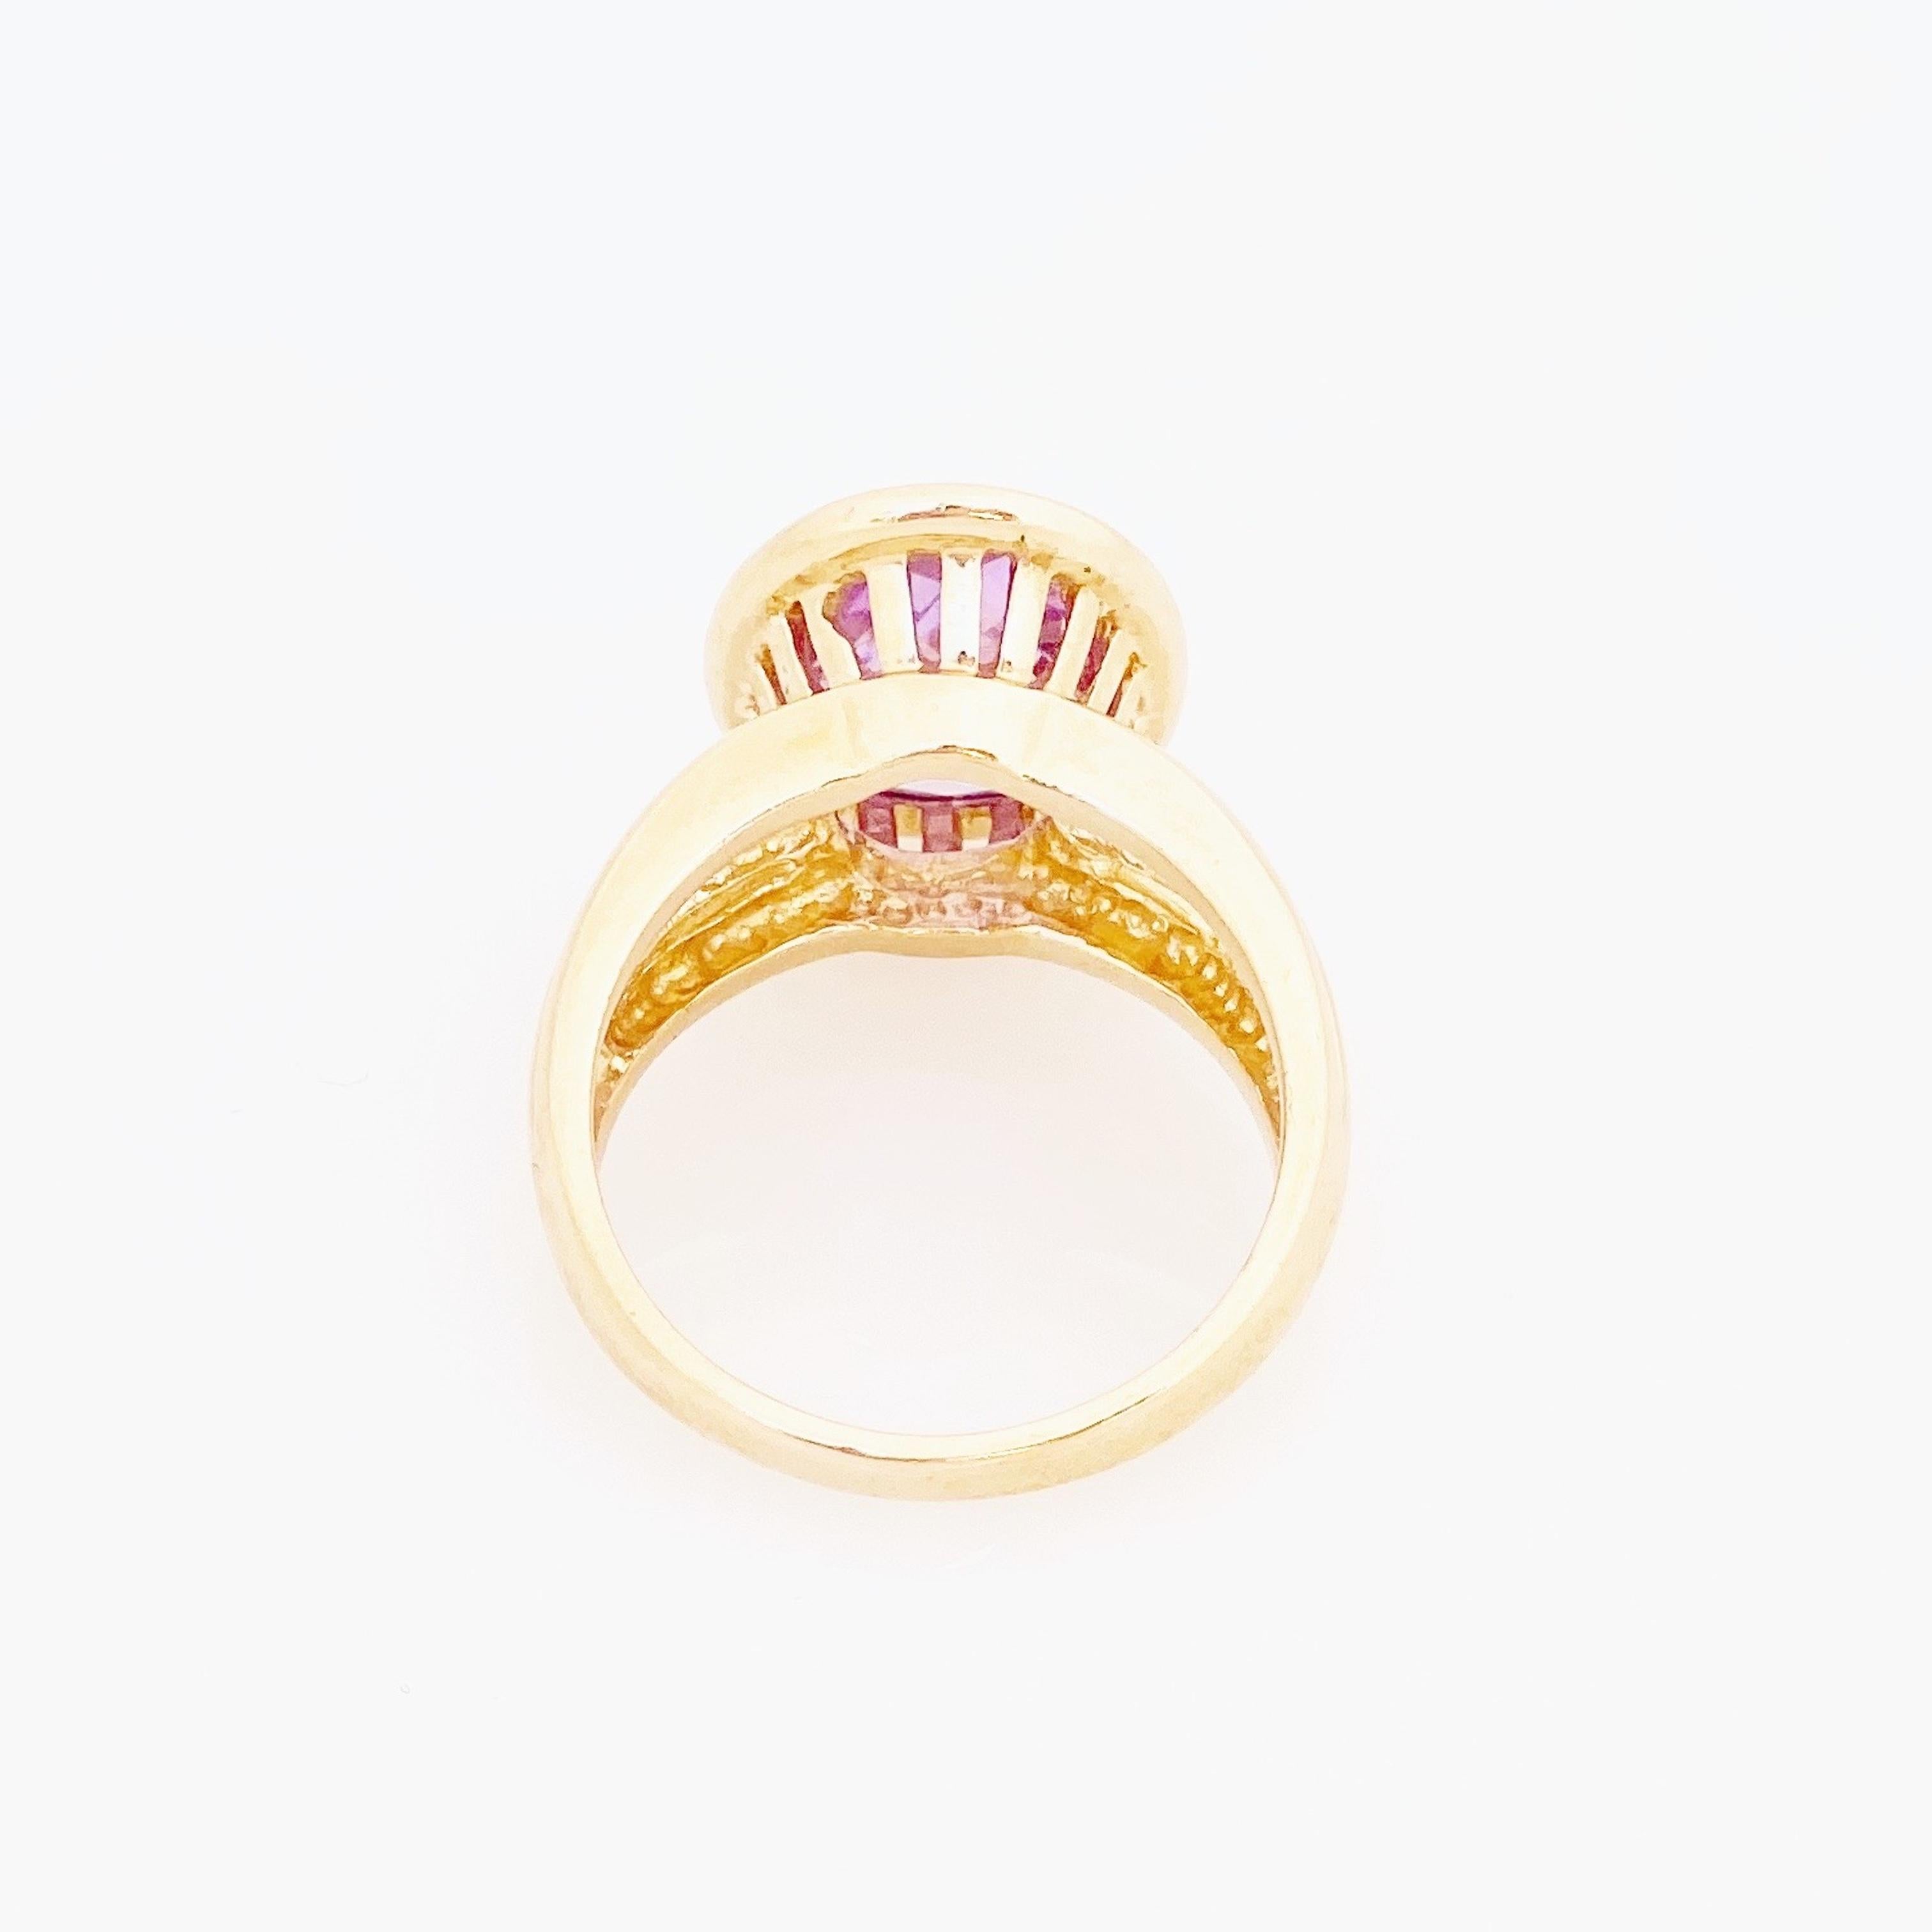 Women's Gold Vermeil Cocktail Ring With Faceted Pink Crystal (Size 9.5), 1980s For Sale